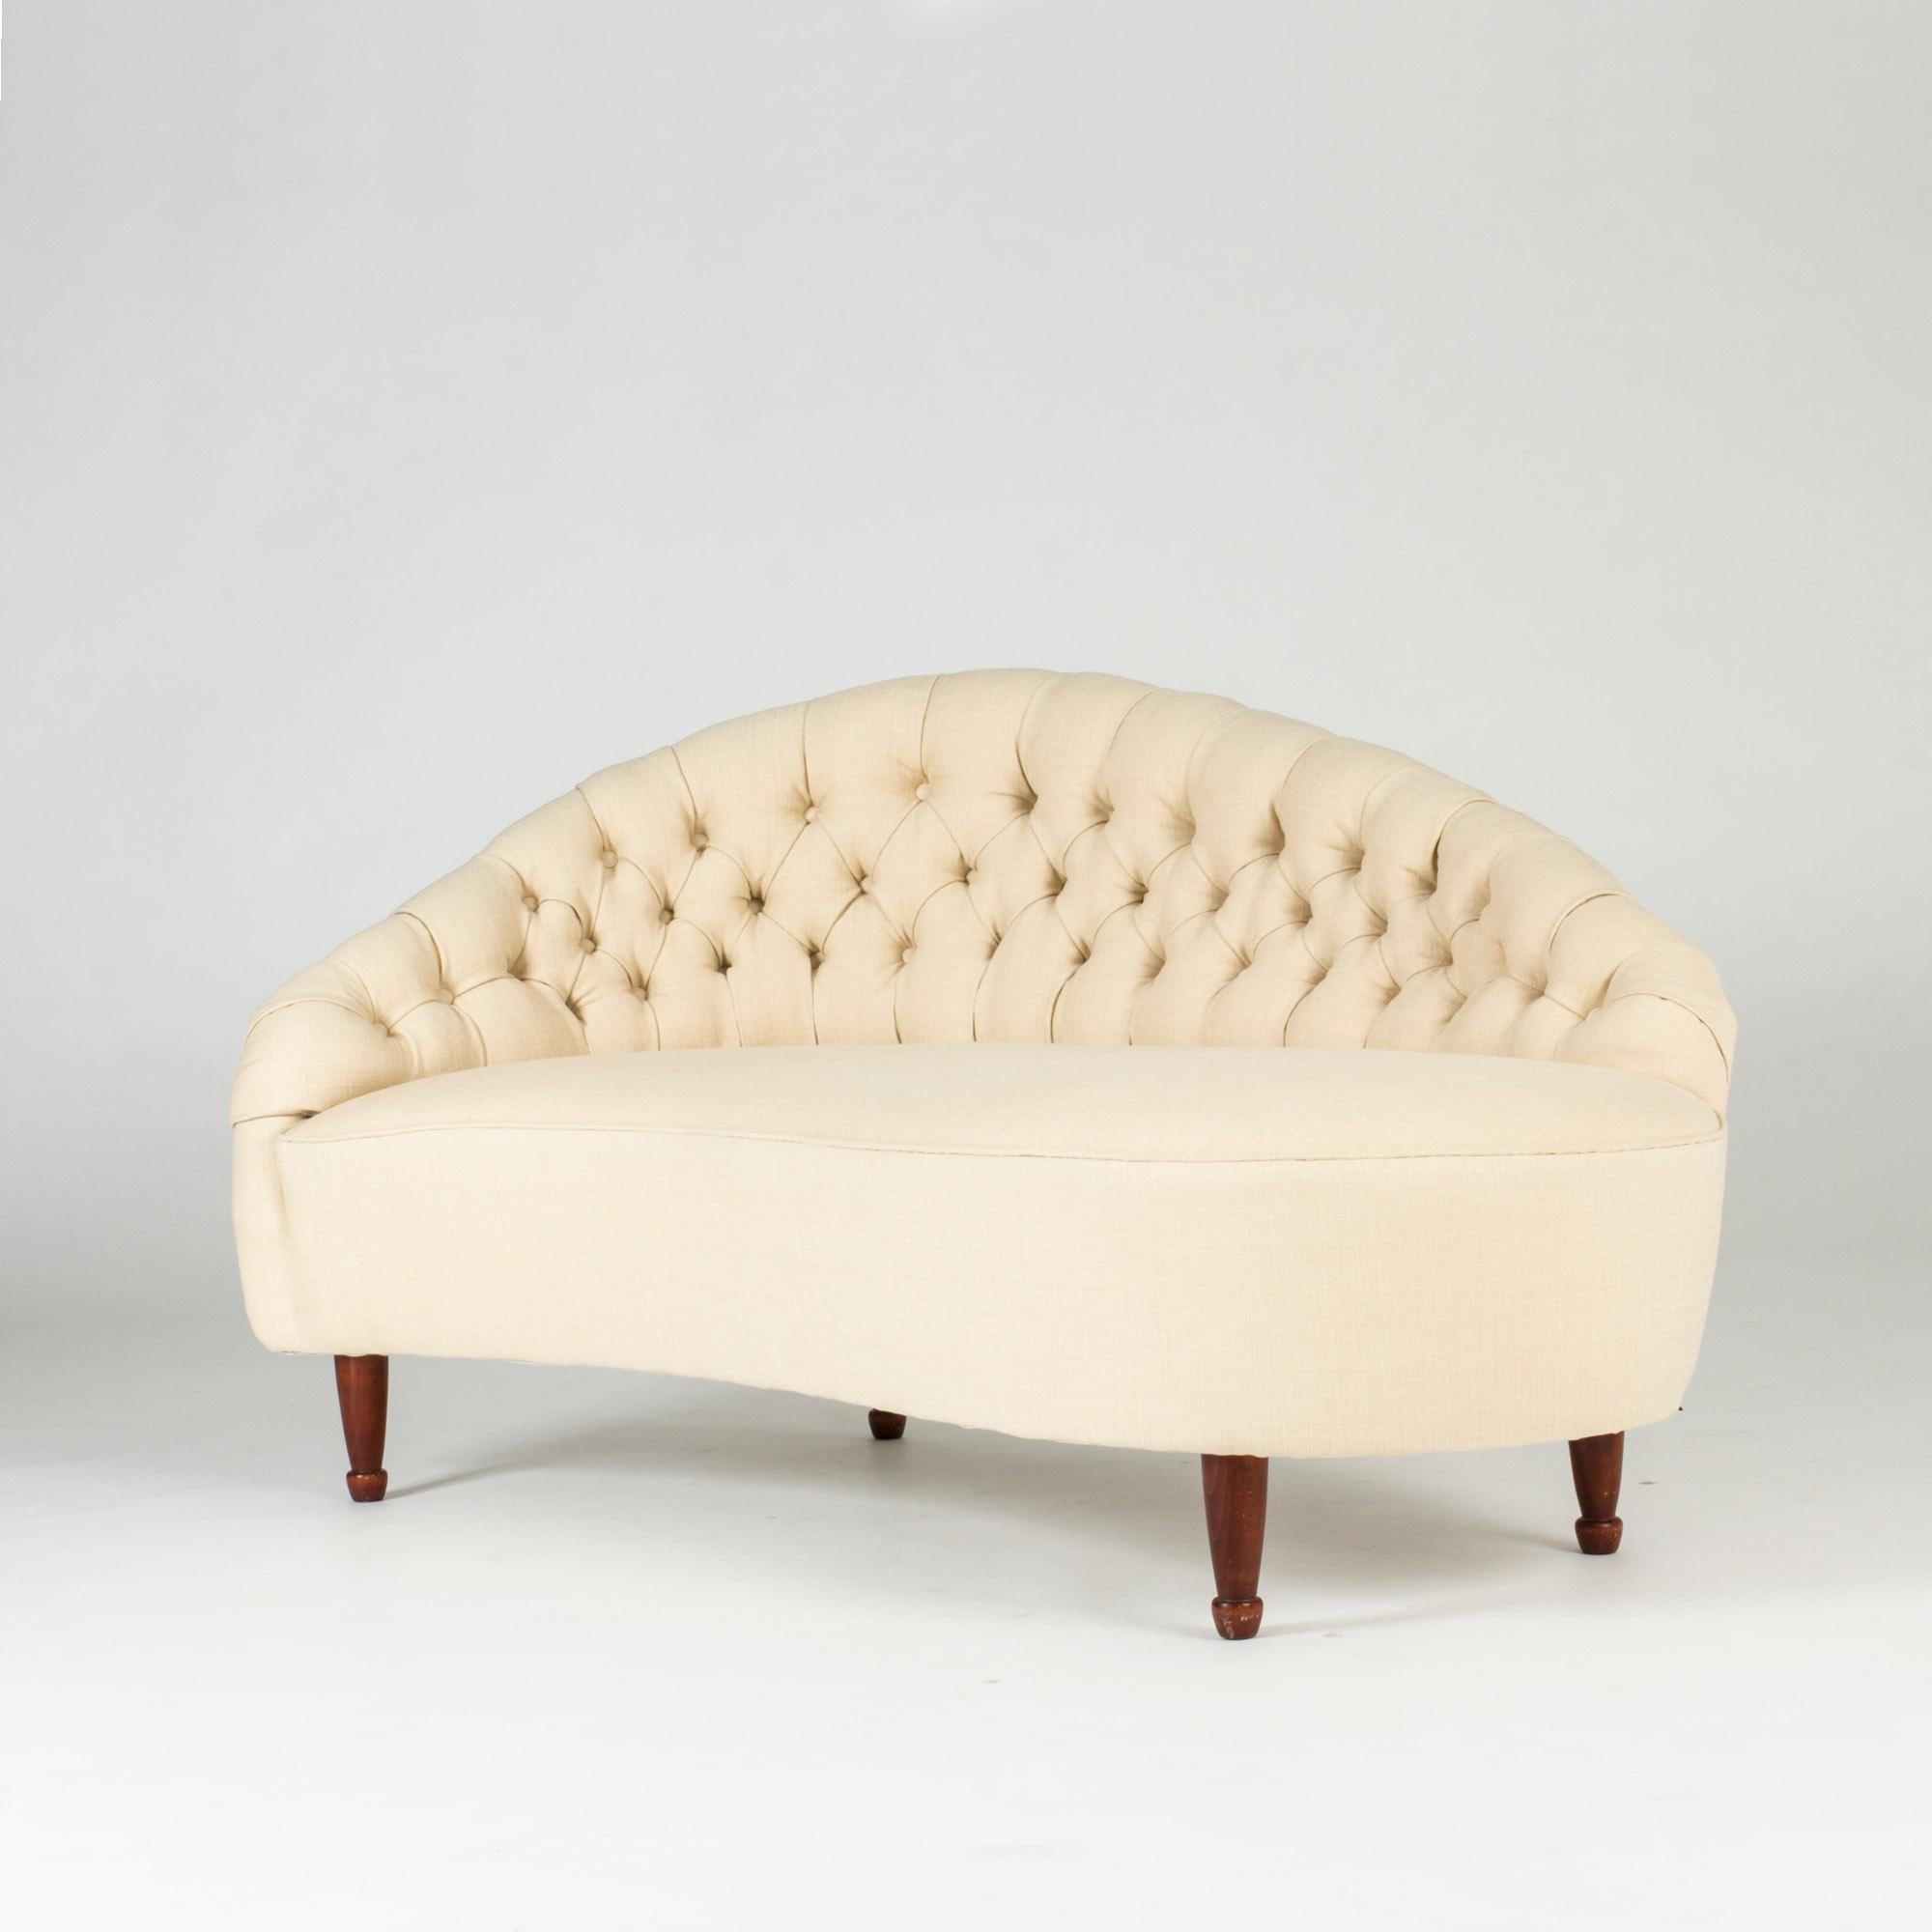 Stunning chaise longue by Carl Cederholm, upholstered in eggshell white linen fabric. Beautiful sweeping lines. Elegantly sculpted stained wood feet.